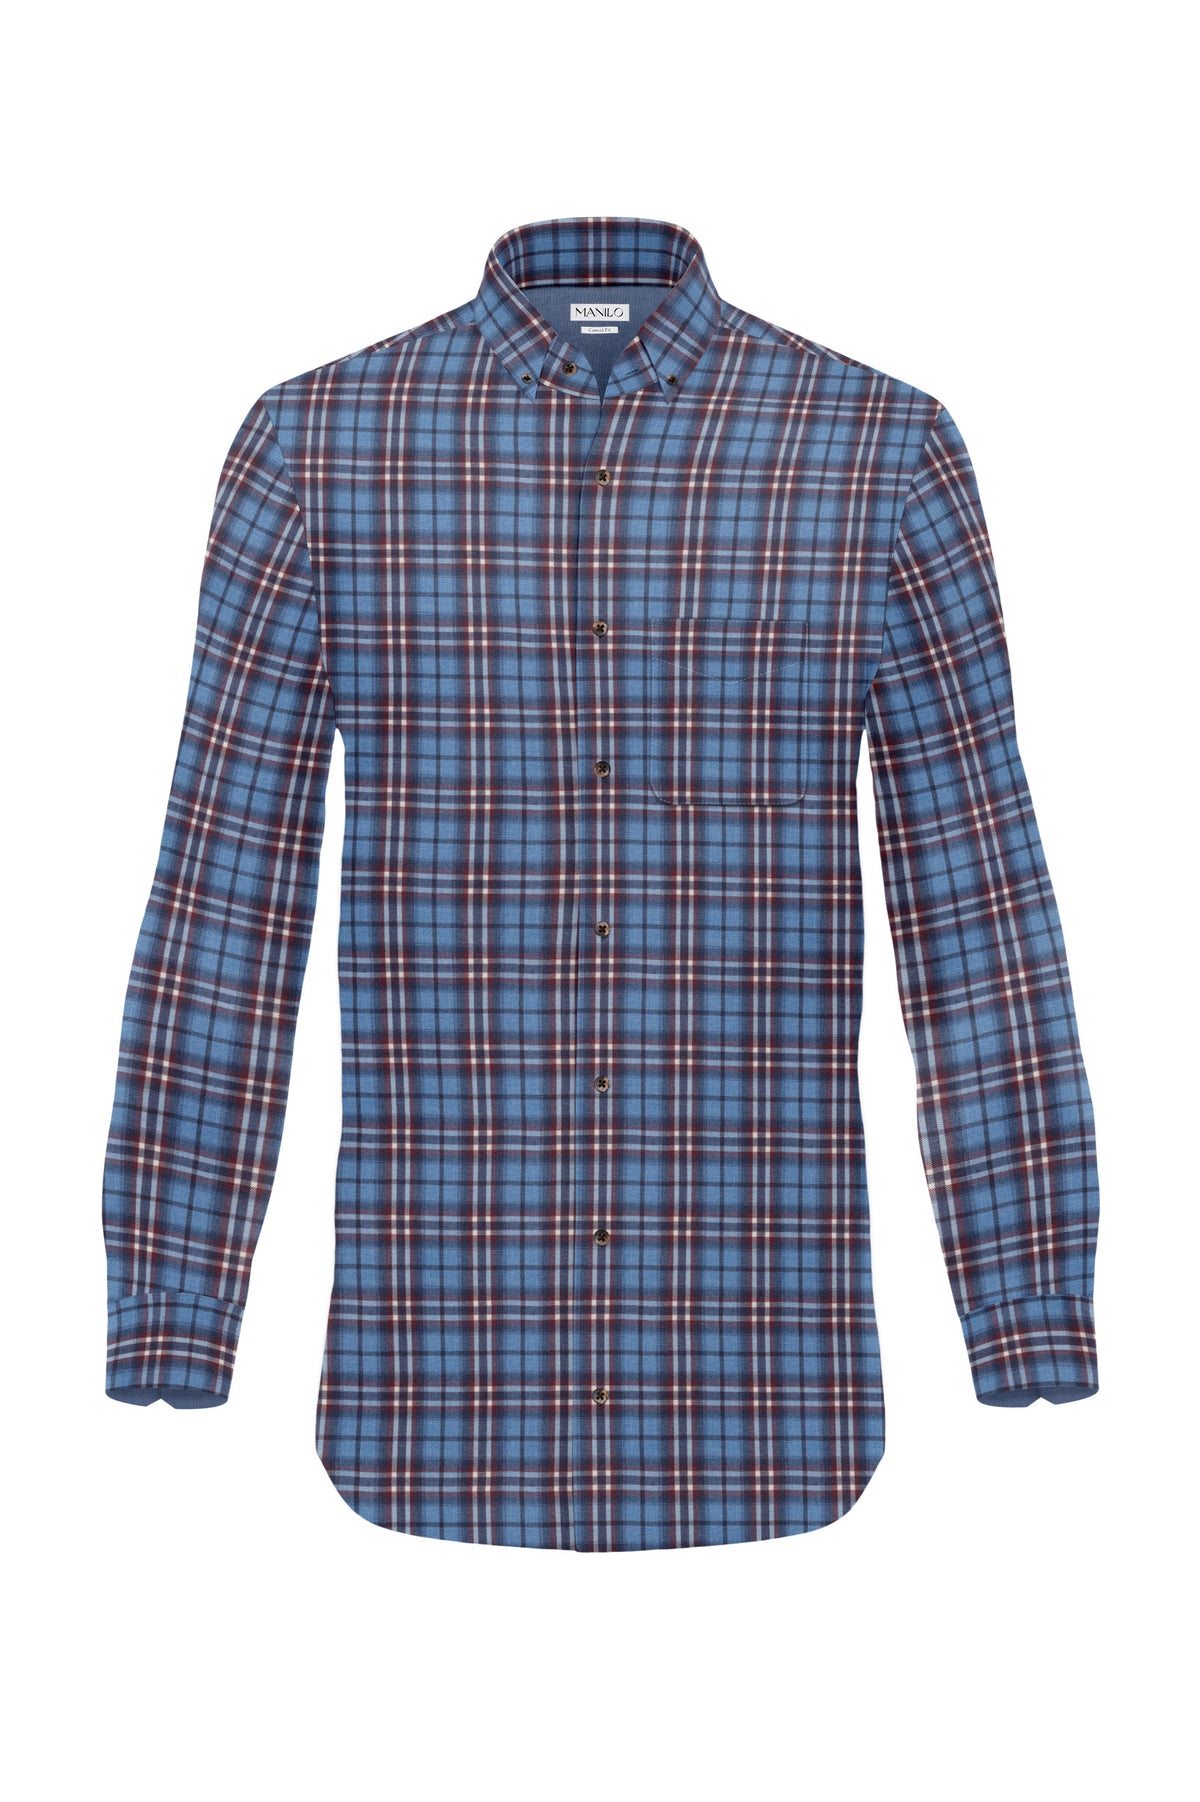 Flannel shirt with check pattern in light blue/red (Art. 2131-C)